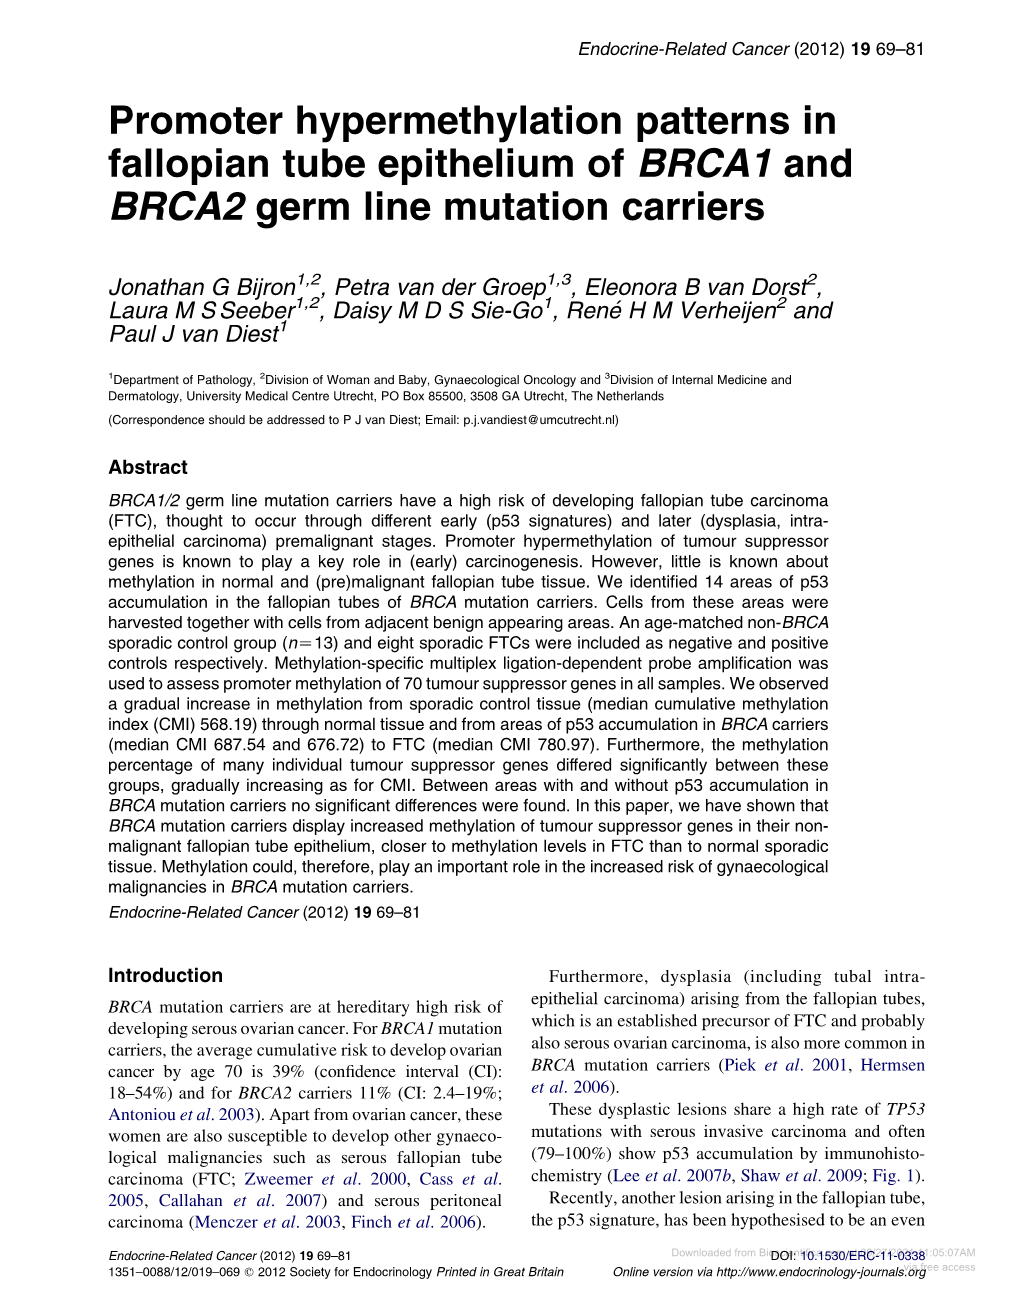 Promoter Hypermethylation Patterns in Fallopian Tube Epithelium of BRCA1 and BRCA2 Germ Line Mutation Carriers